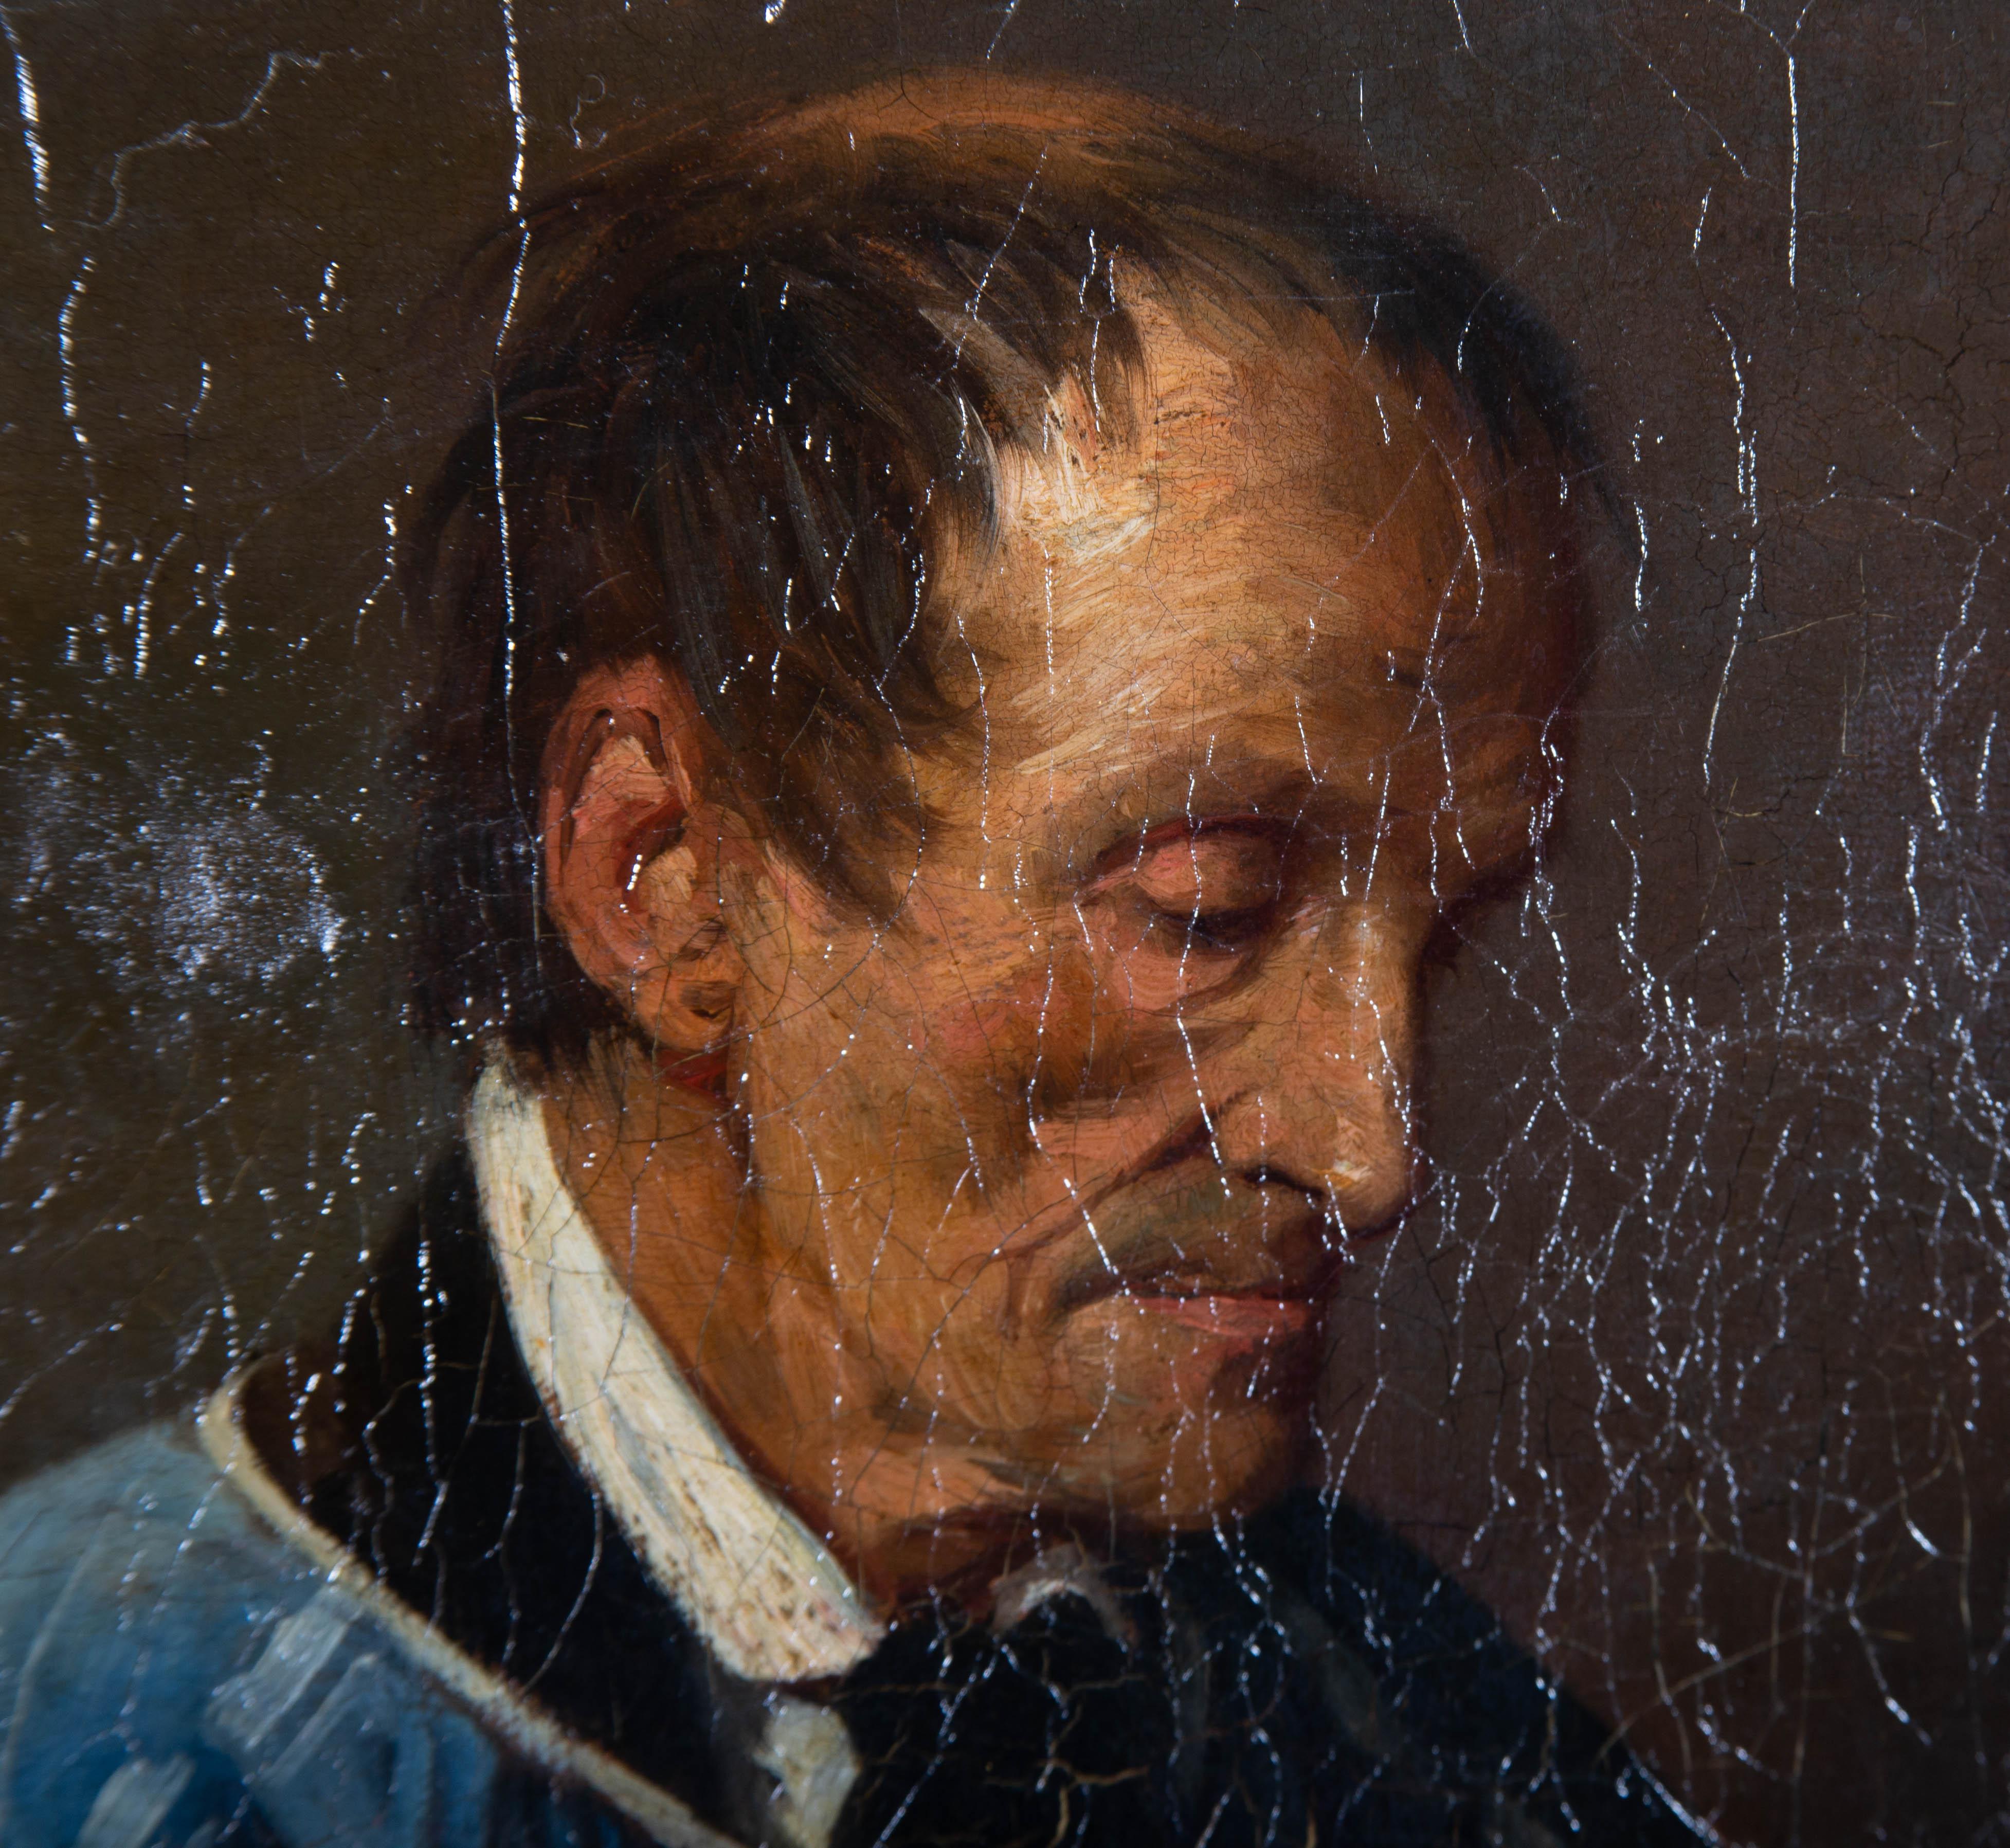 This fine 19th century oil depicts a man reading with his hands clasped together as if in prayer. The blue robes suggest a connection to the church choir. The man is captured in excellent detail, particularly in his delicate facial features. Signed